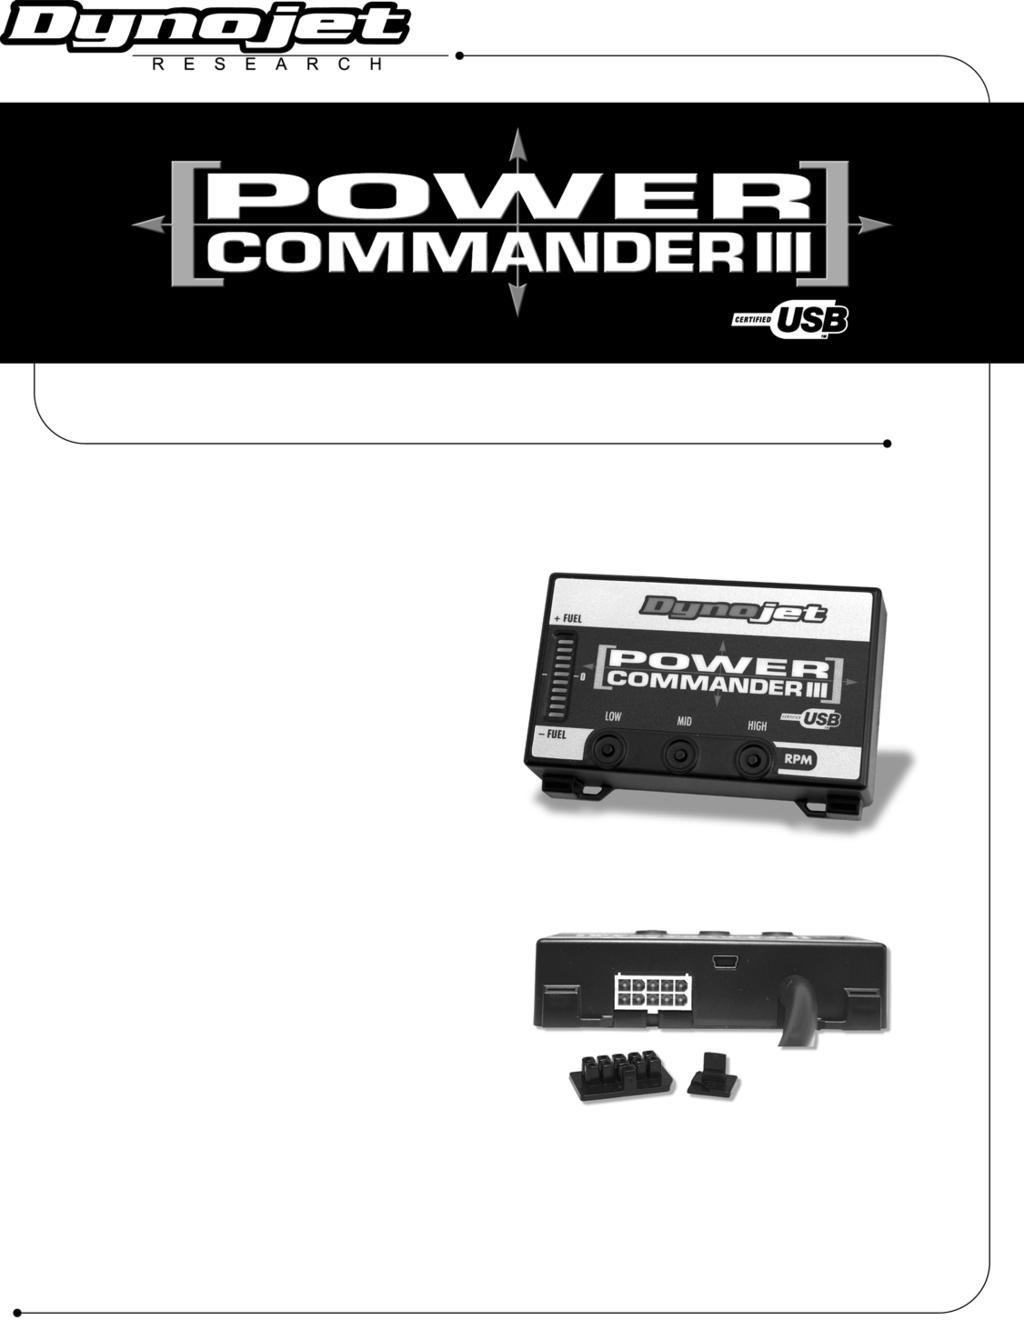 2002-2003 Kawasaki Mean Streak Installation Instructions Parts List 1 Power Commander 1 USB Cable 1 CD-ROM 1 Installation Guide 1 Power Adapter 1 Wire Tap 2 Power Commander Decals 2 Dynojet Decals 1